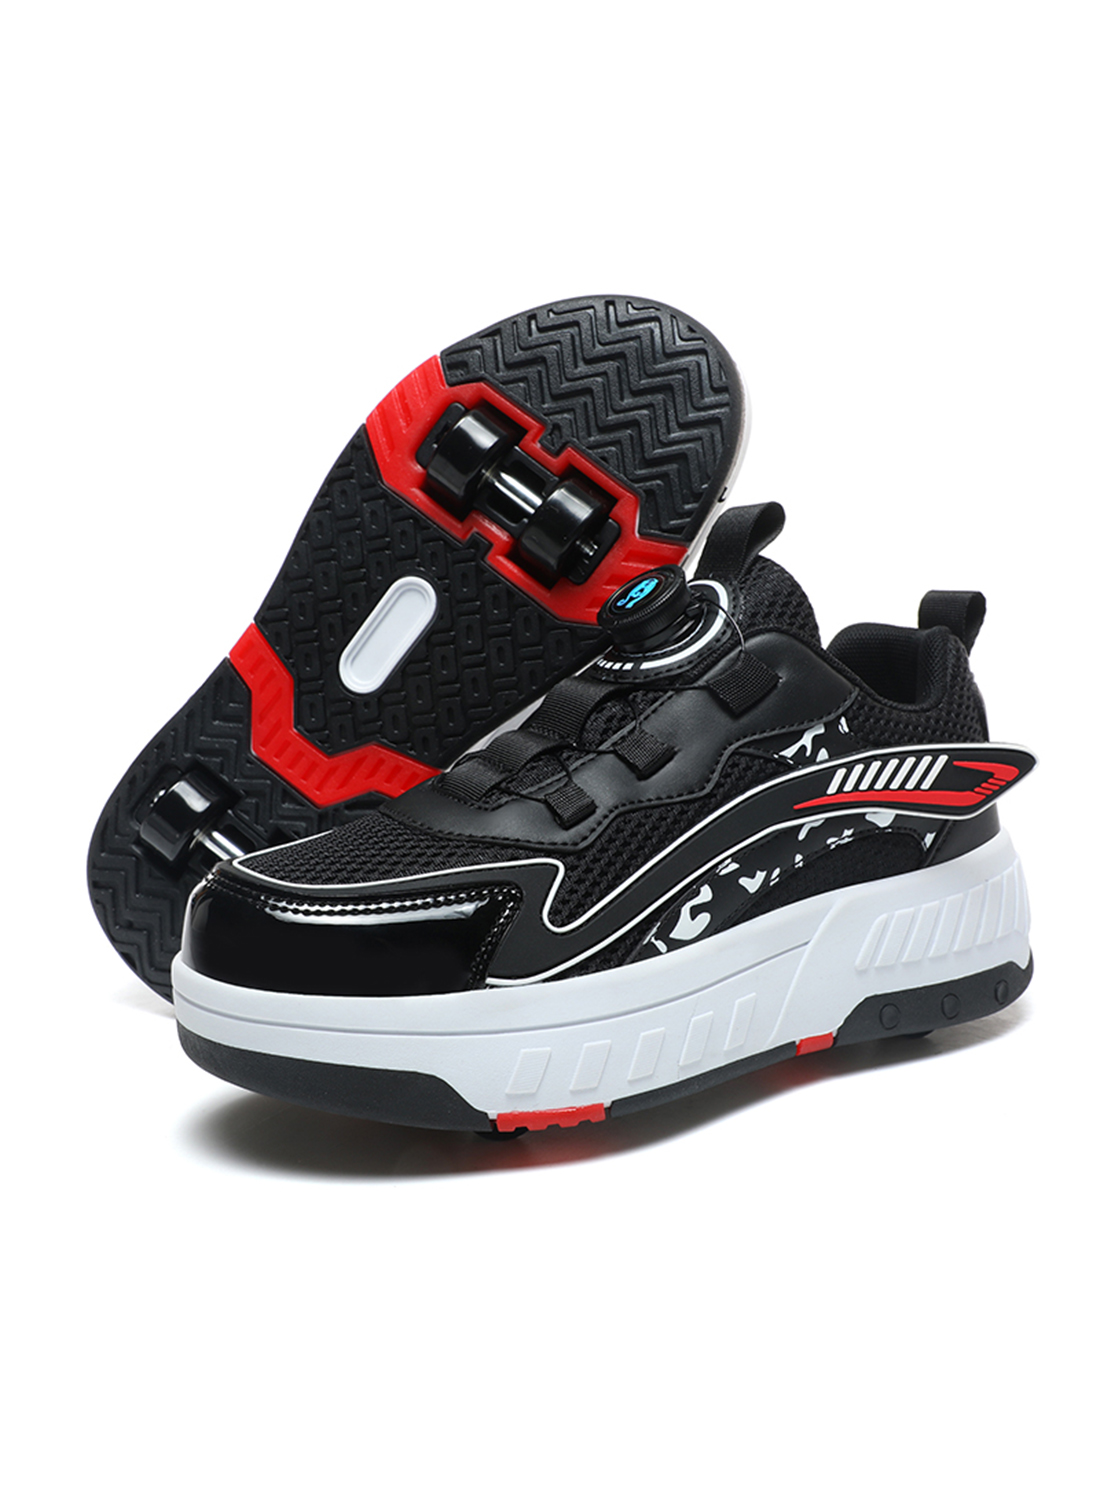 Kids Roller Skate Shoes Fashion With Four Wheels Sport Sneaker Outdoor For Kids For Boys Girls